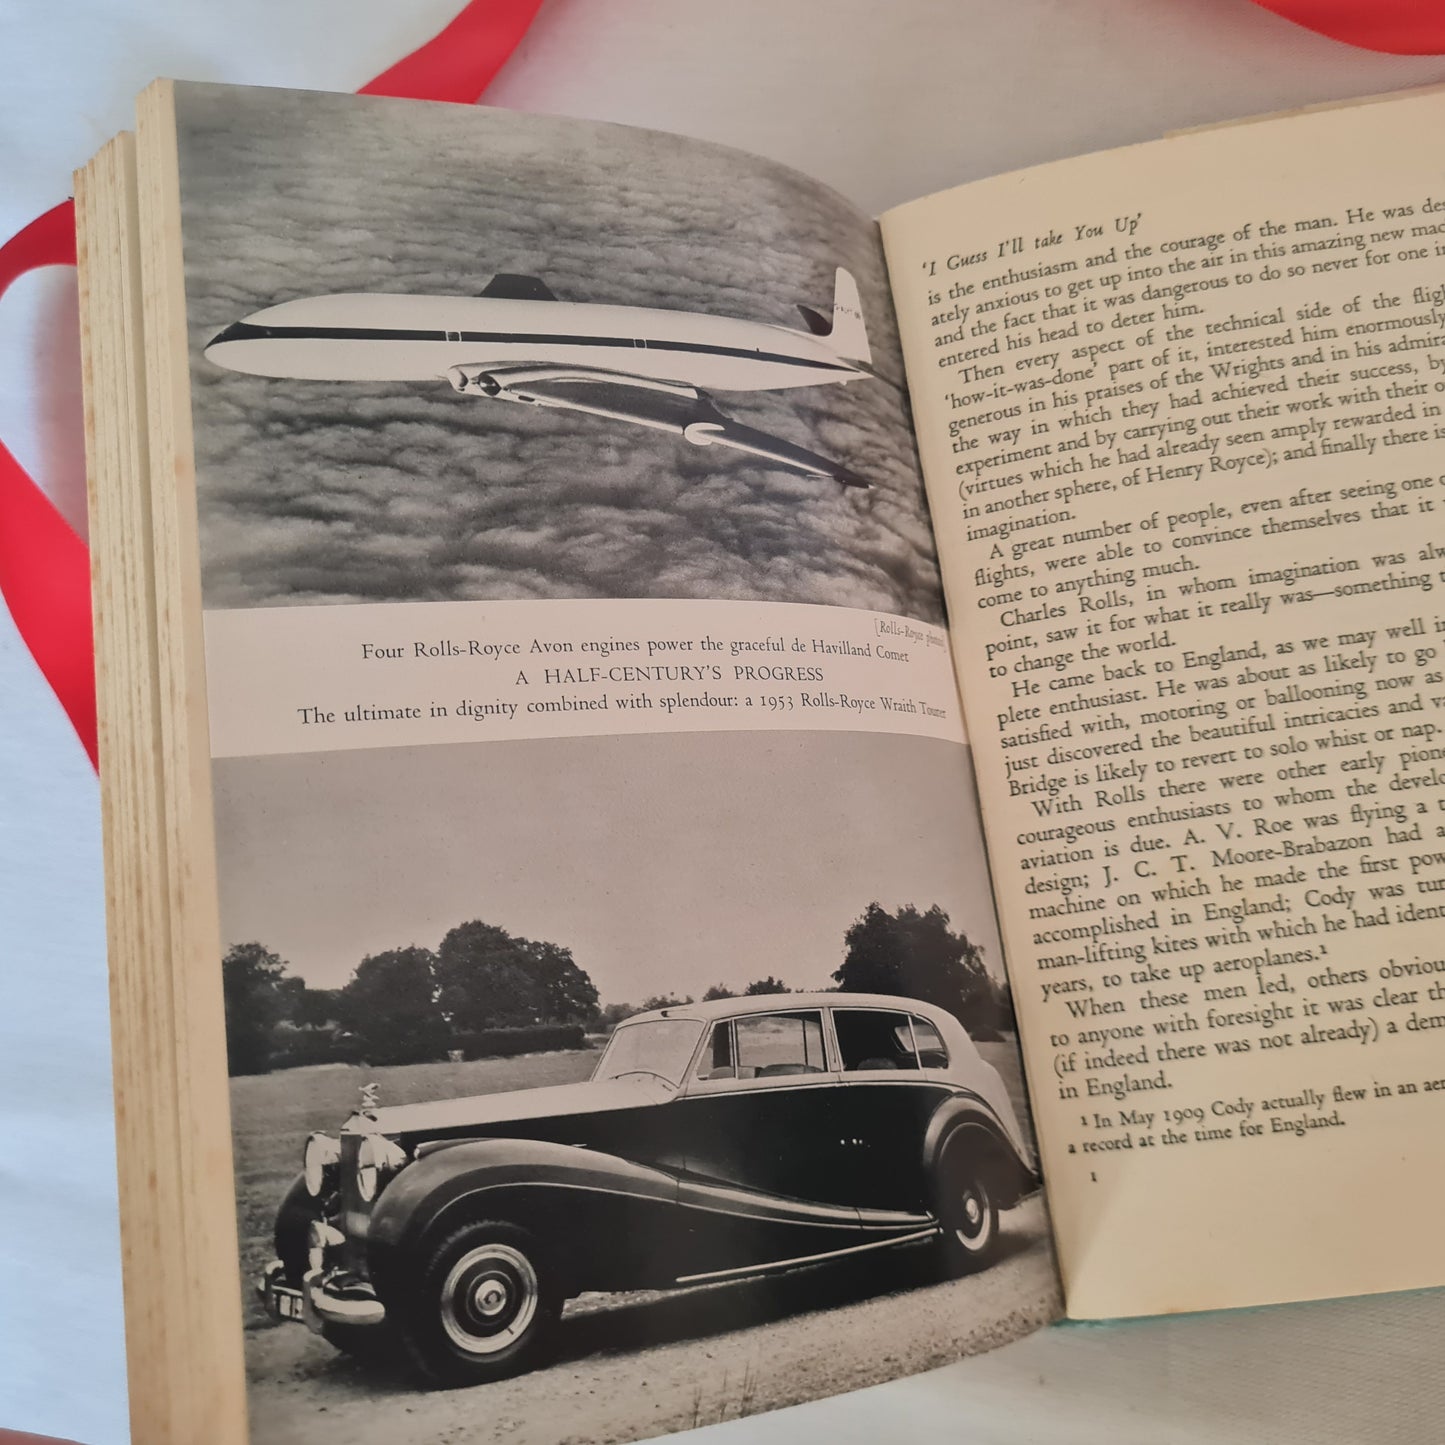 1953 Rolls: Man of Speed A Life of Charles Stewart Rolls, Some Account of the Early Days of Motoring and Flying / FIRST Edition, Bodley Head